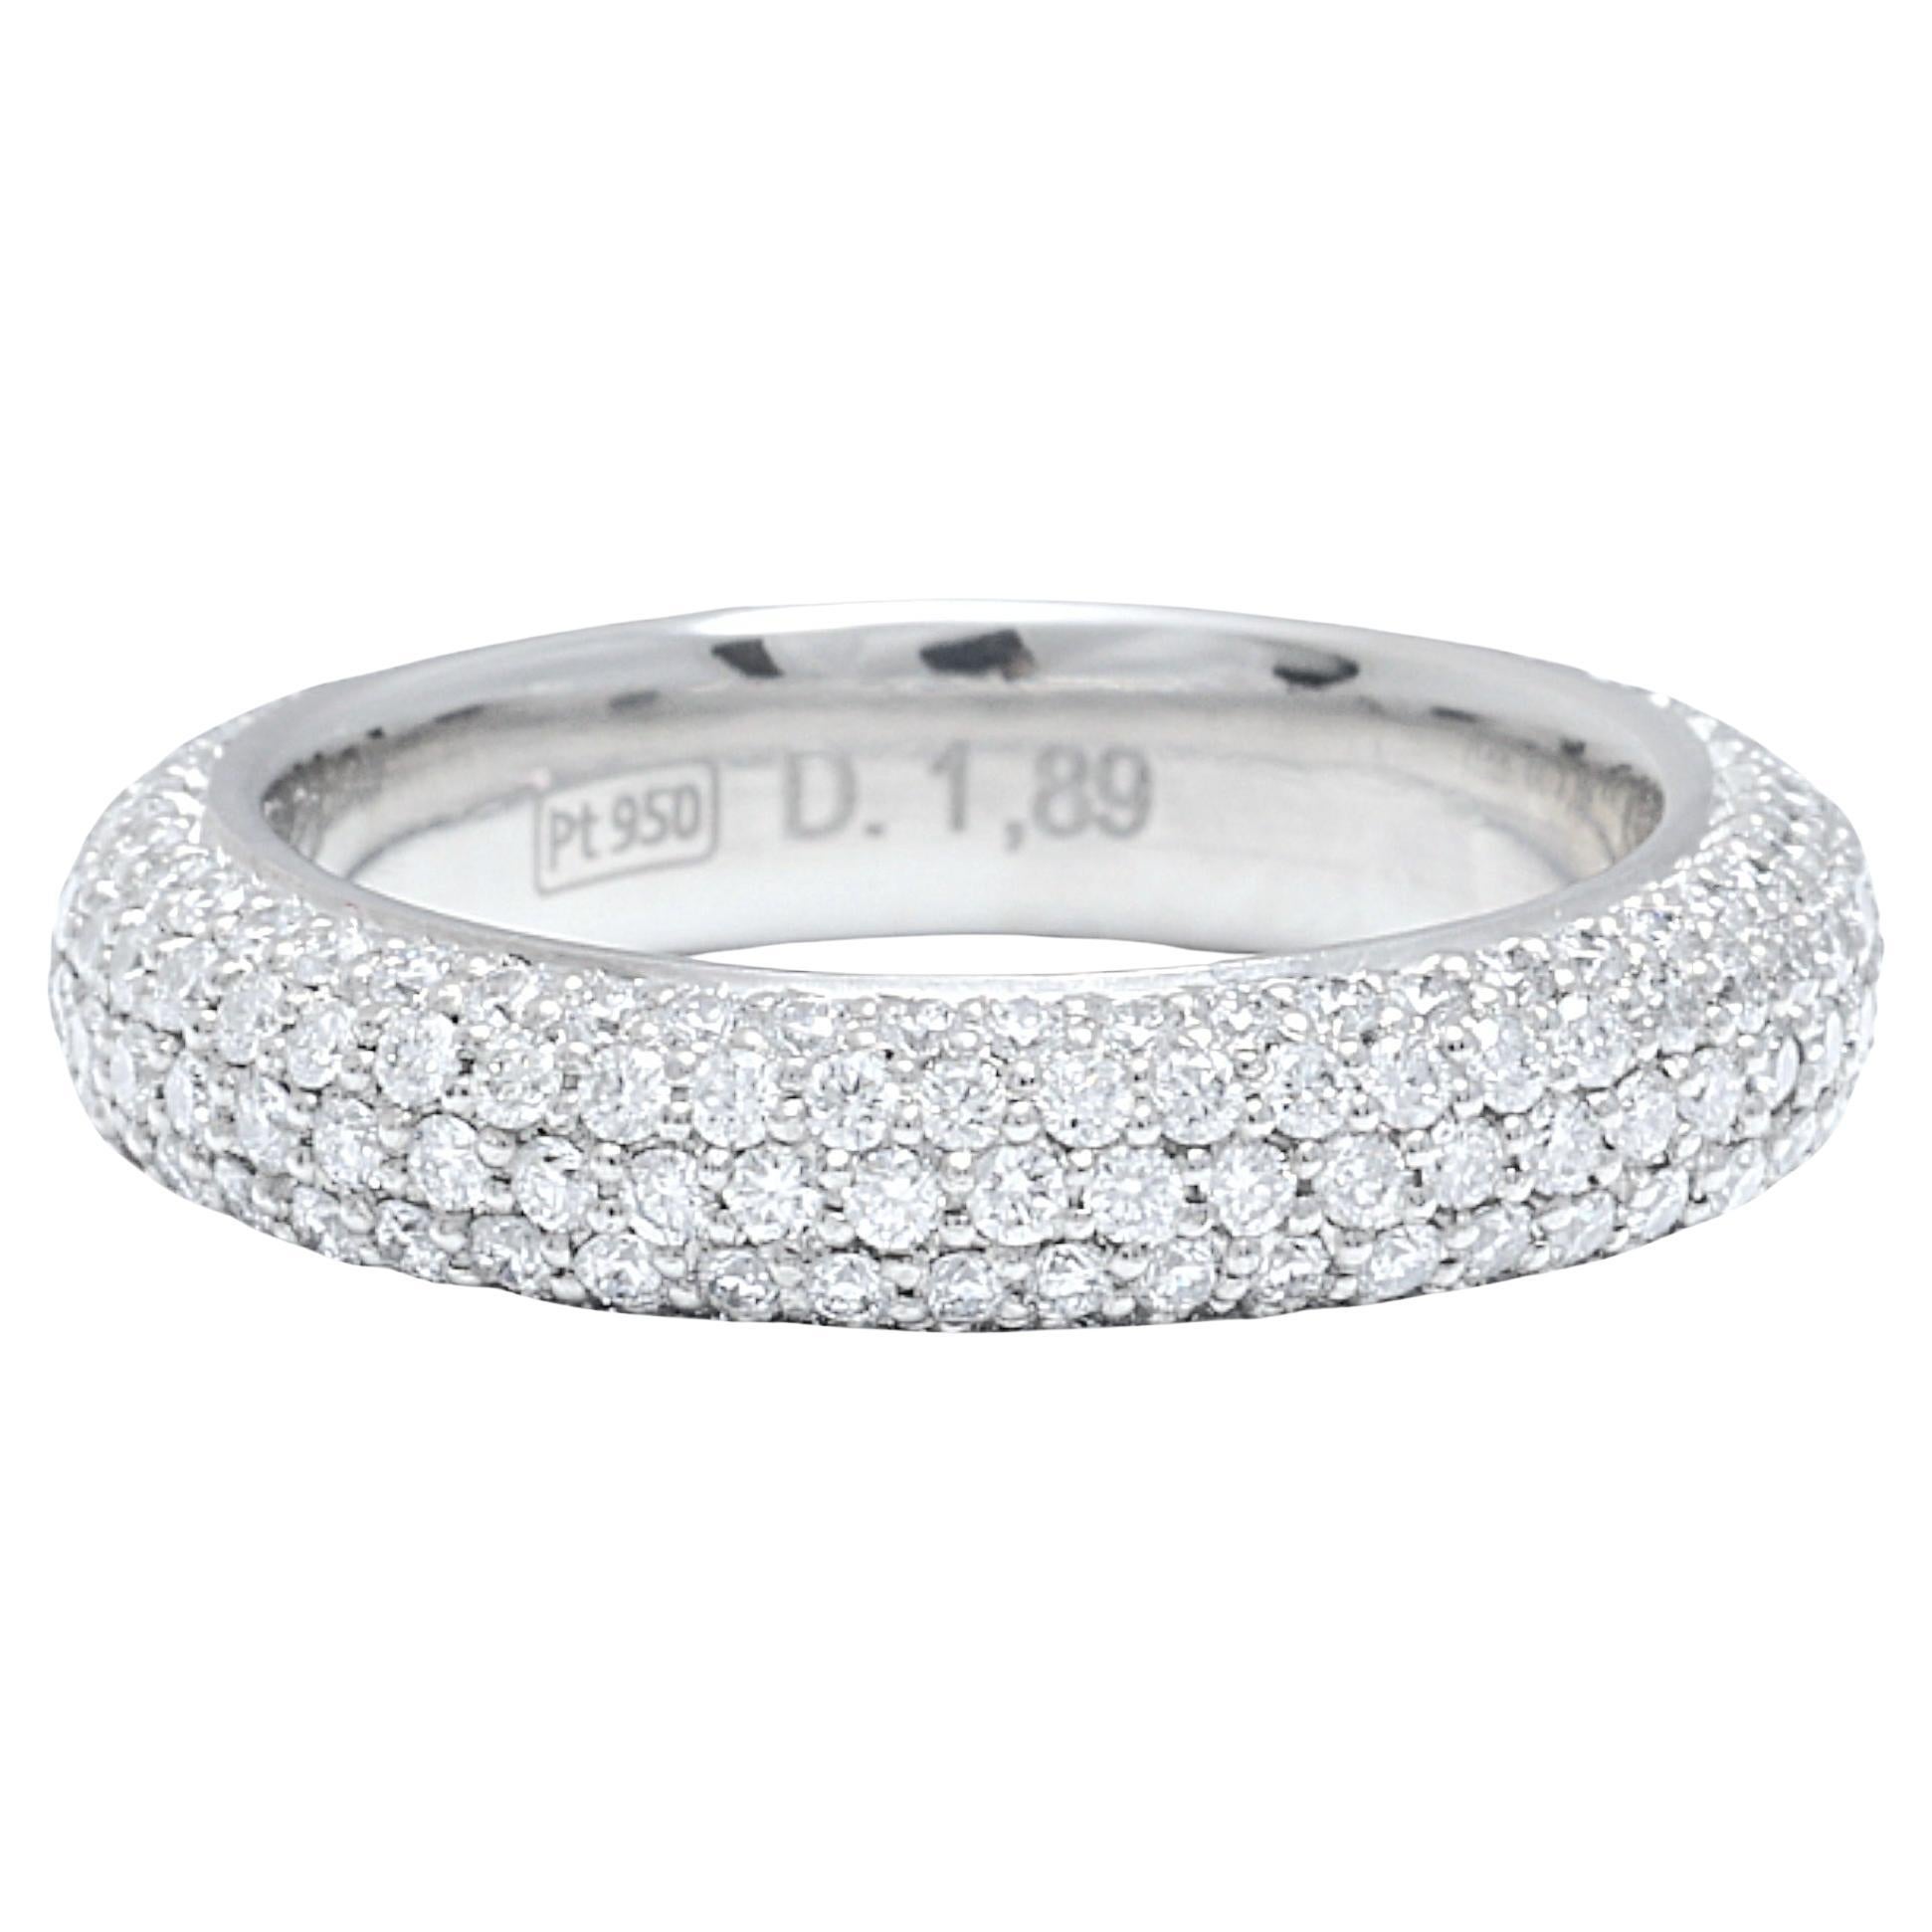 Platinum Eternity Ring with 1.89 ct. Diamonds Completely Hand Made